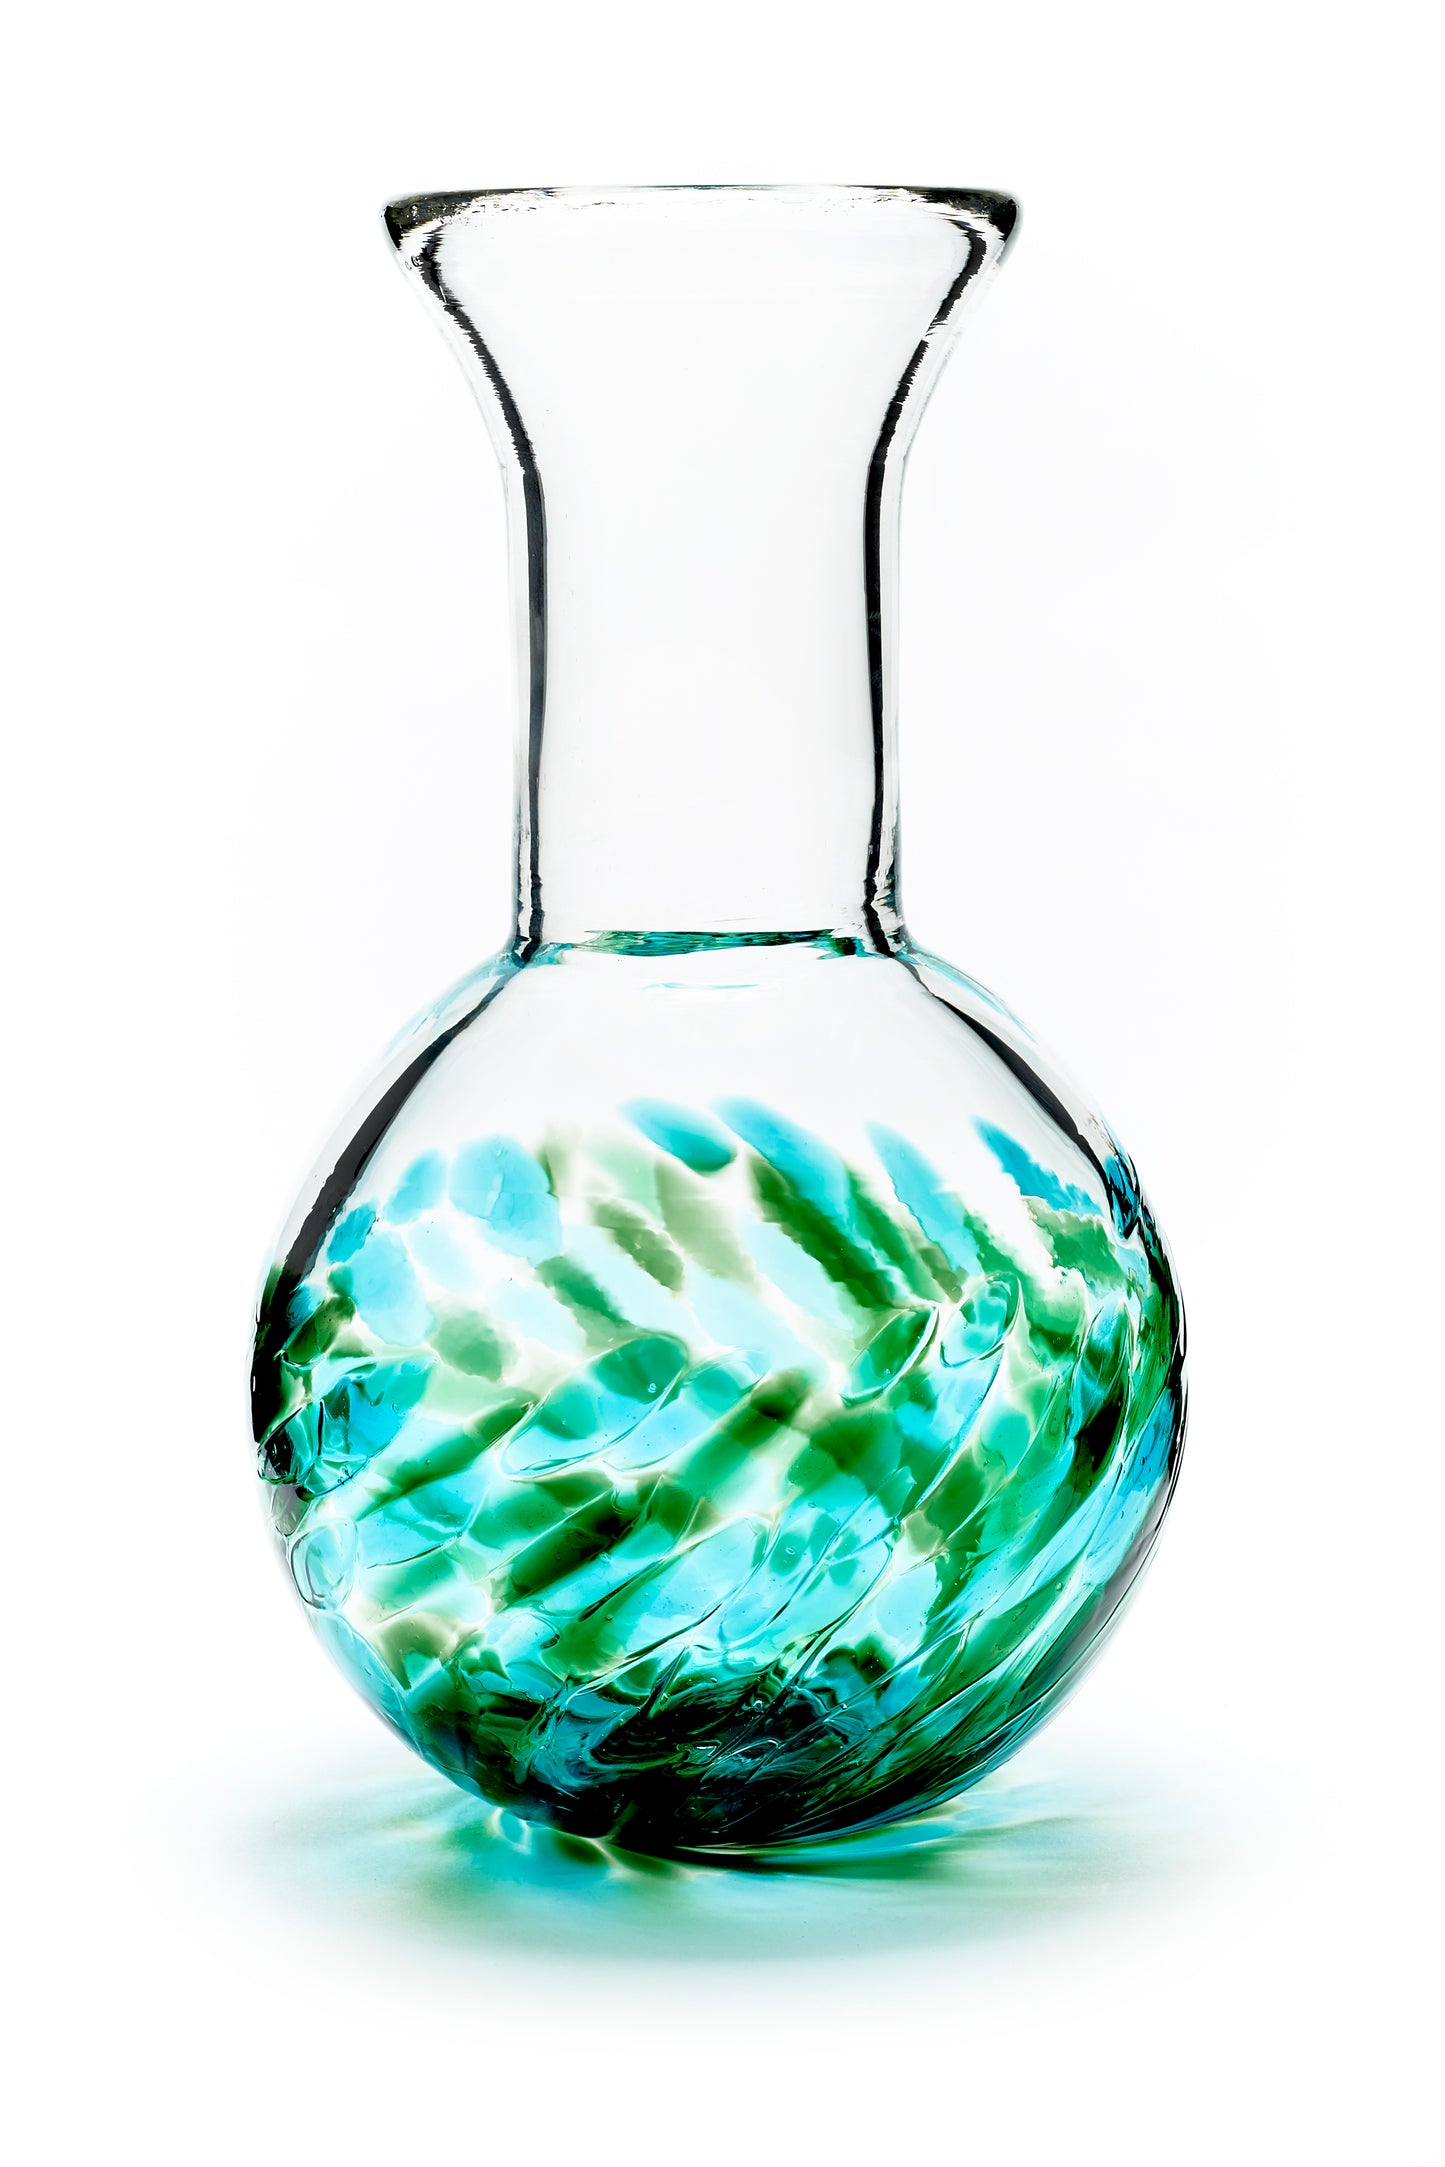 Hand blown glass vase. Green glass on the bottom. Colour combination is called “Emerald.”